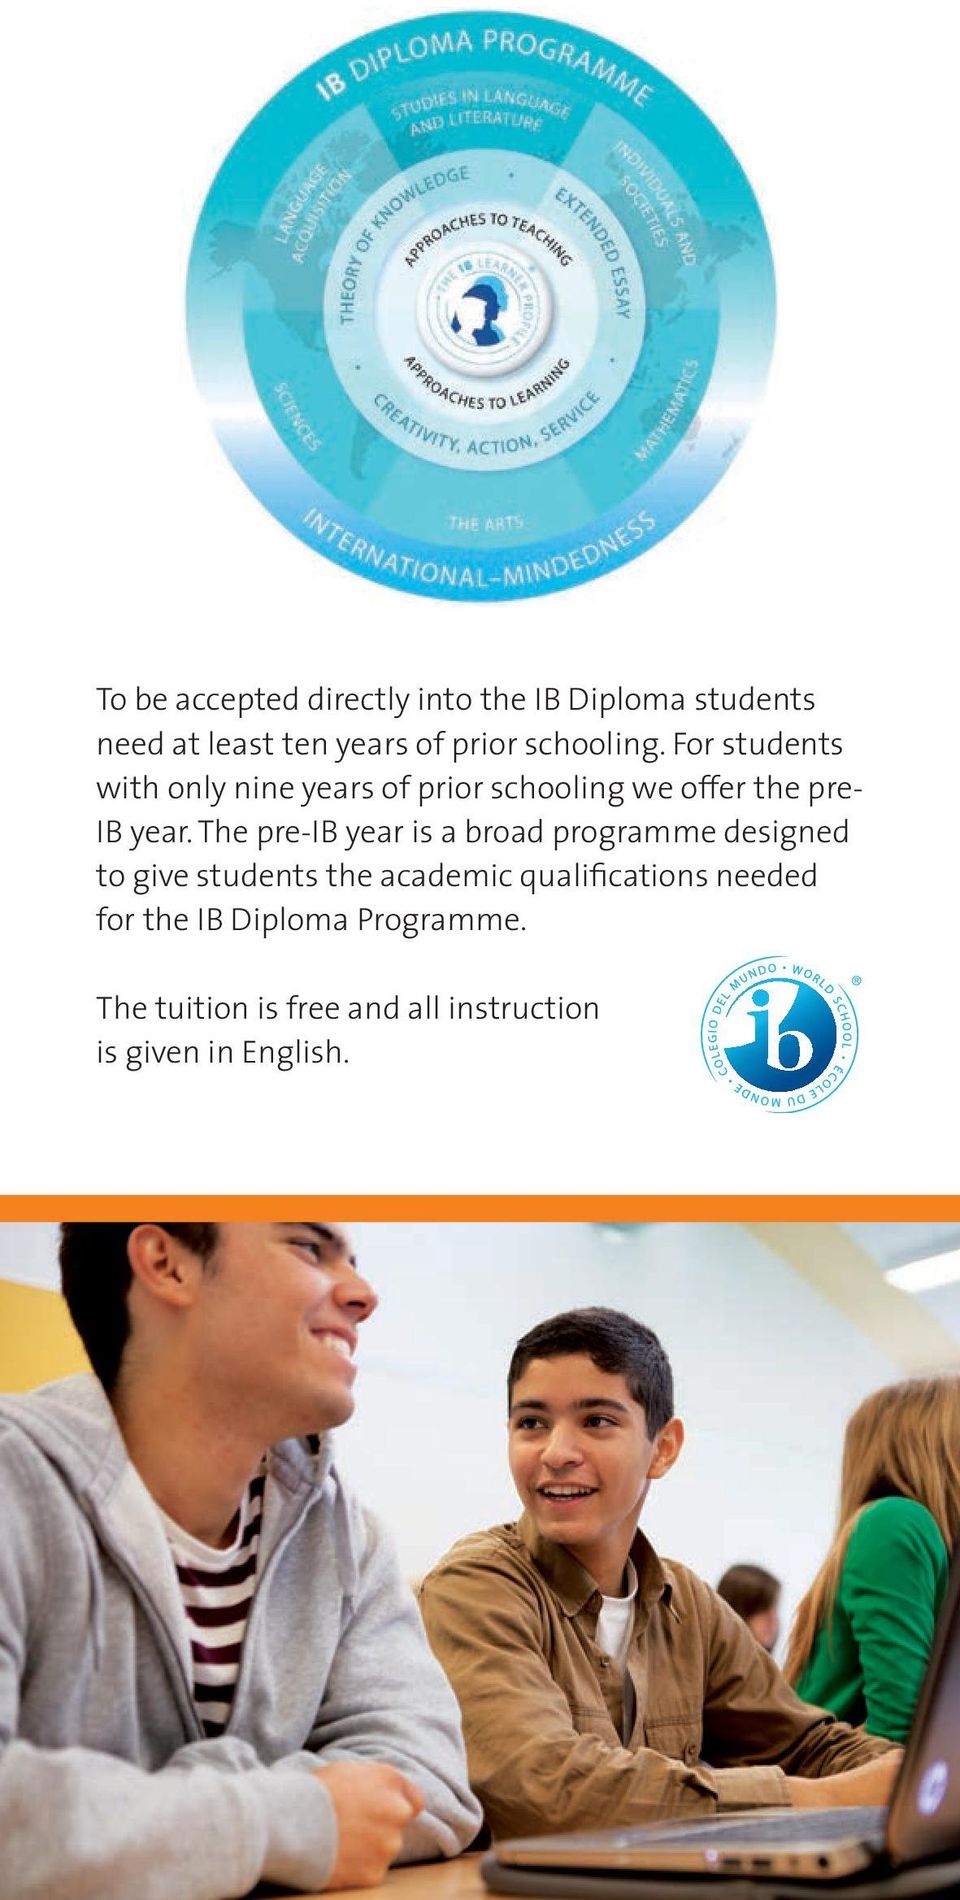 The pre-ib year is a broad programme designed to give students the academic qualifications